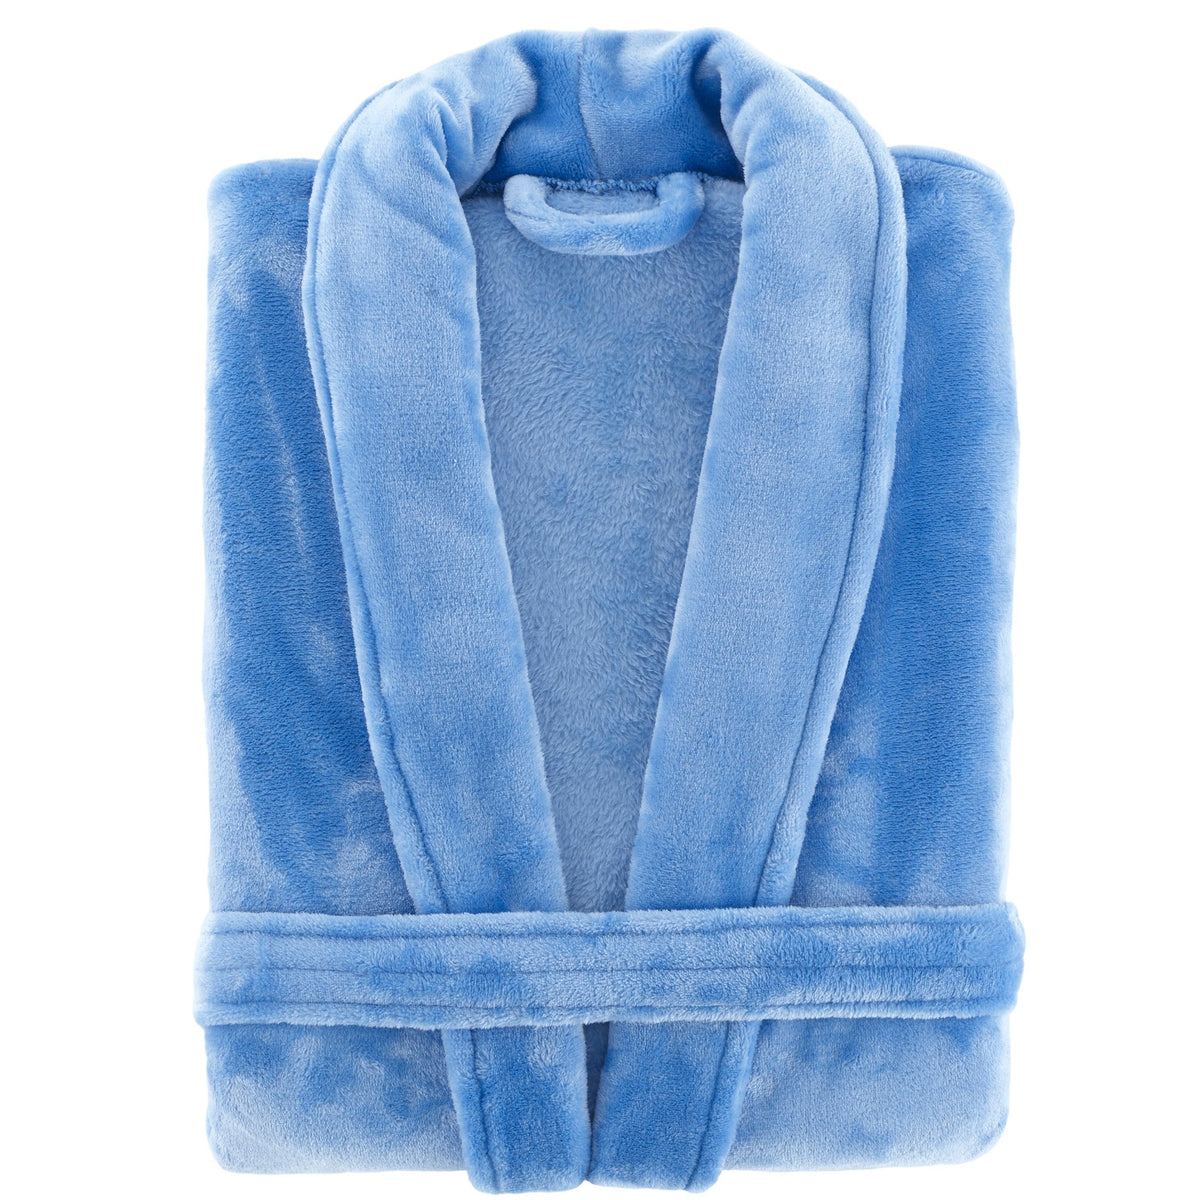 Folded Image of Pine Cone Hill Sheepy Fleece 2.0 Robe in Color French Blue